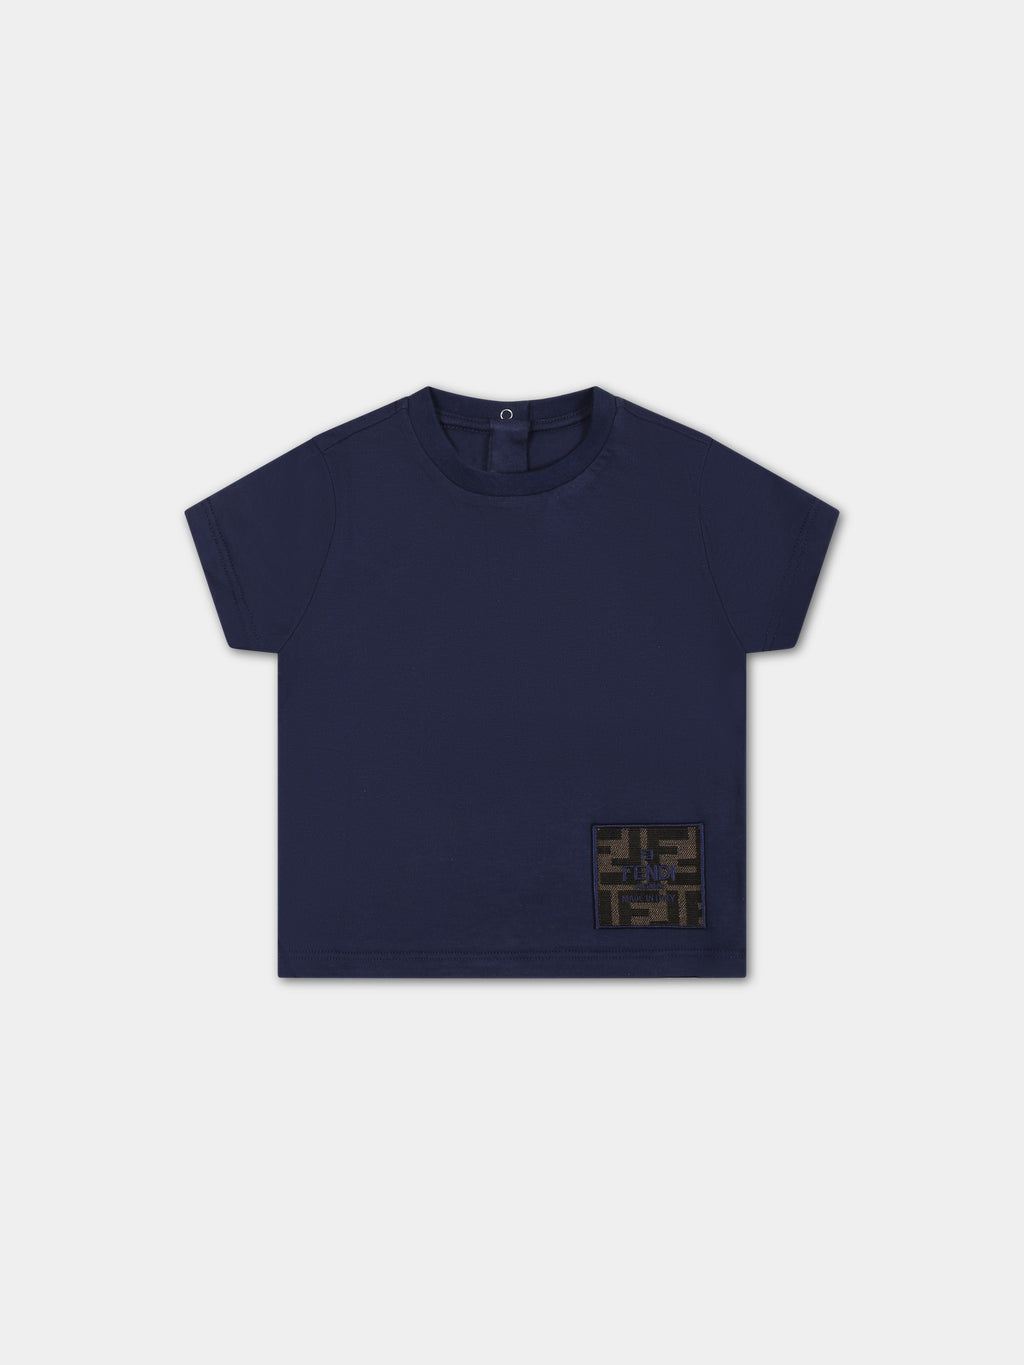 Blue t-shirt for baby boy with FF